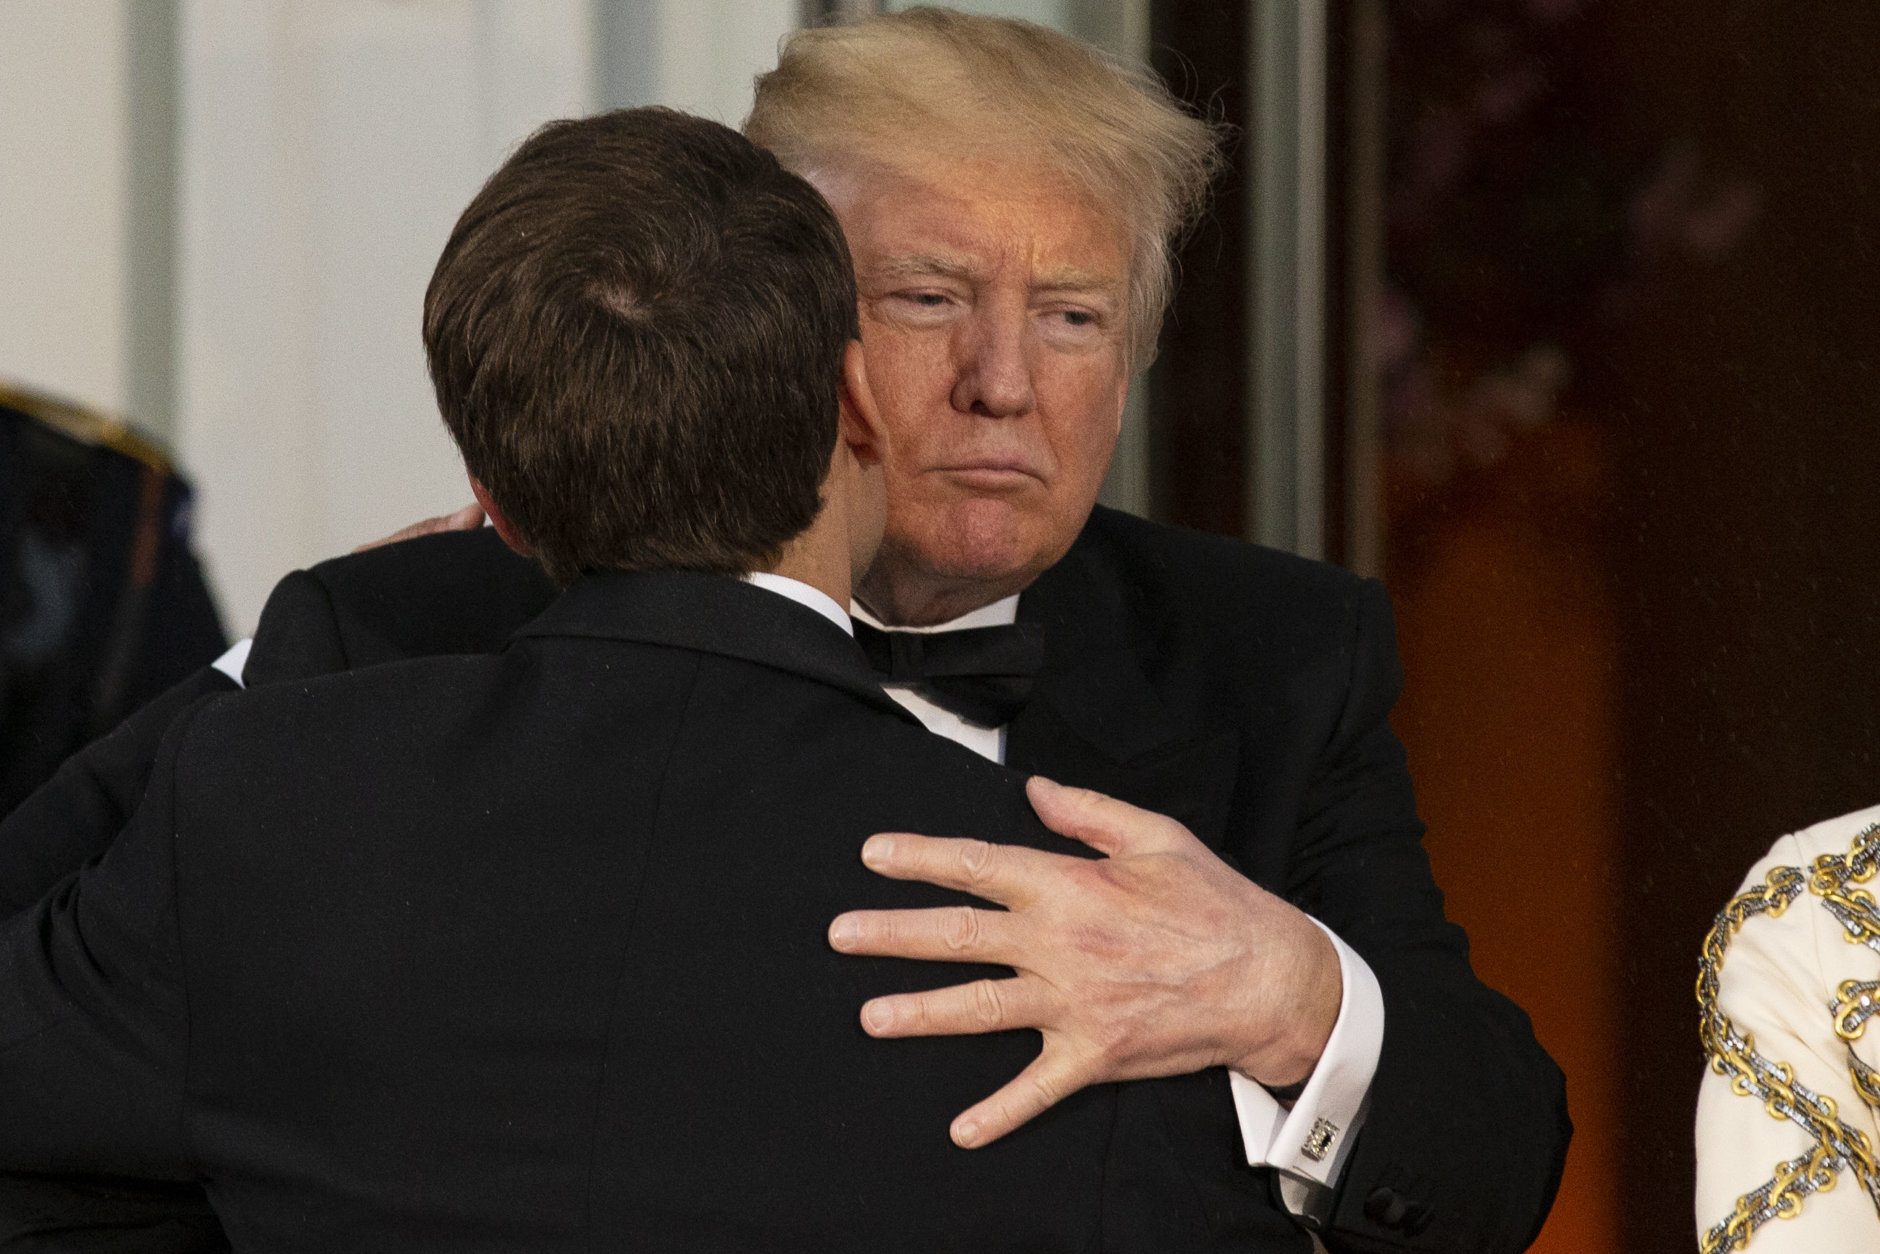 WASHINGTON, DC - APRIL 24: U.S President Donald Trump greets French President Emmanuel Macron after his arrival at the North Portico before a State Dinner at the White House, April 24, 2018 in Washington, DC. Trump is hosting Macron for a two-day official visit that included dinner at George Washington's Mount Vernon, a tree planting on the White House South Lawn and a joint news conference. (Photo by Alex Edelman-Pool/Getty Images)